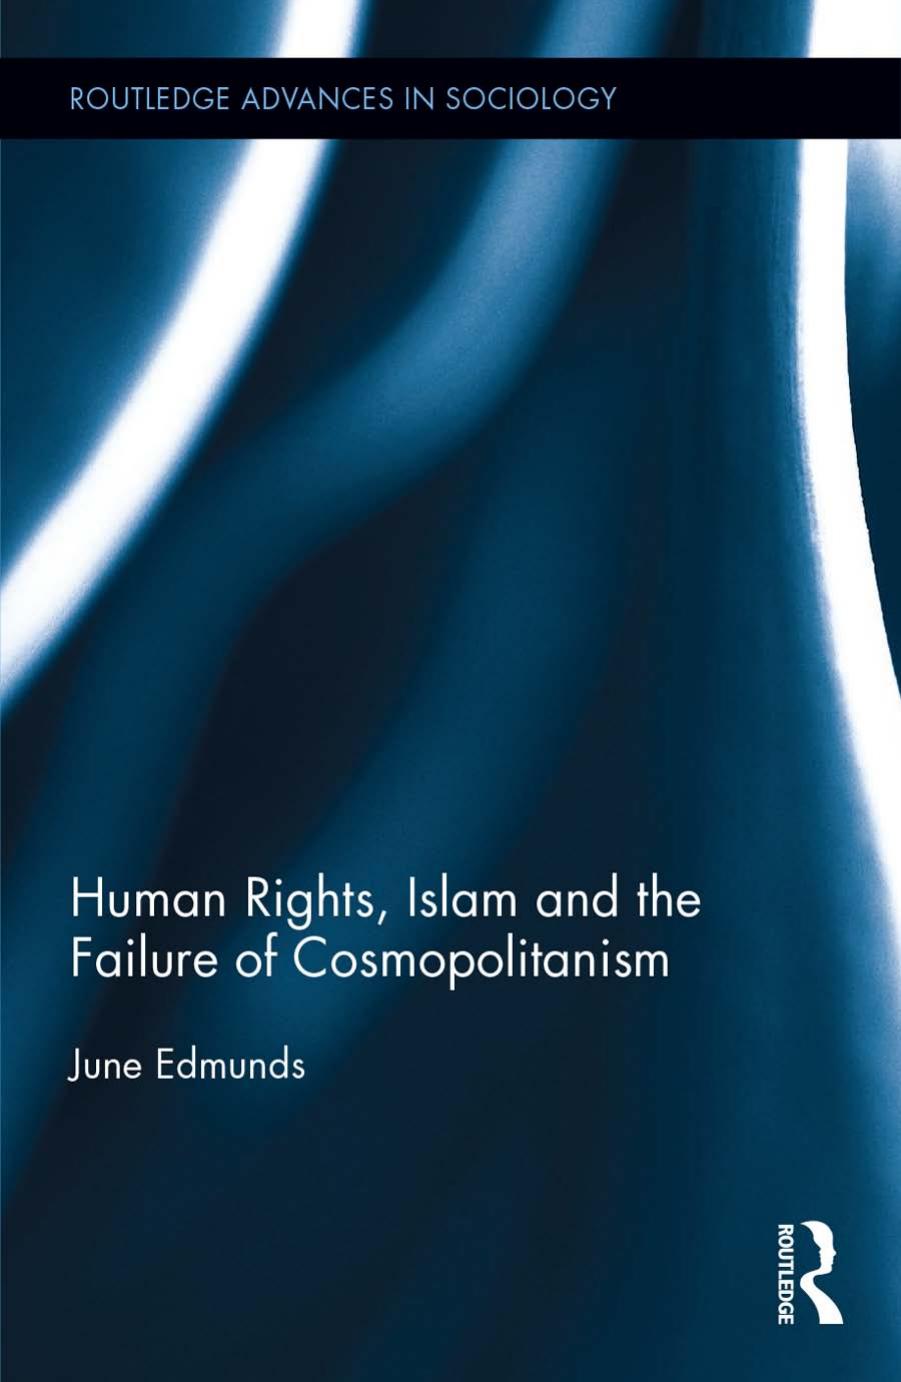 Human Rights, Islam and the Failure of Cosmopolitanism 2017